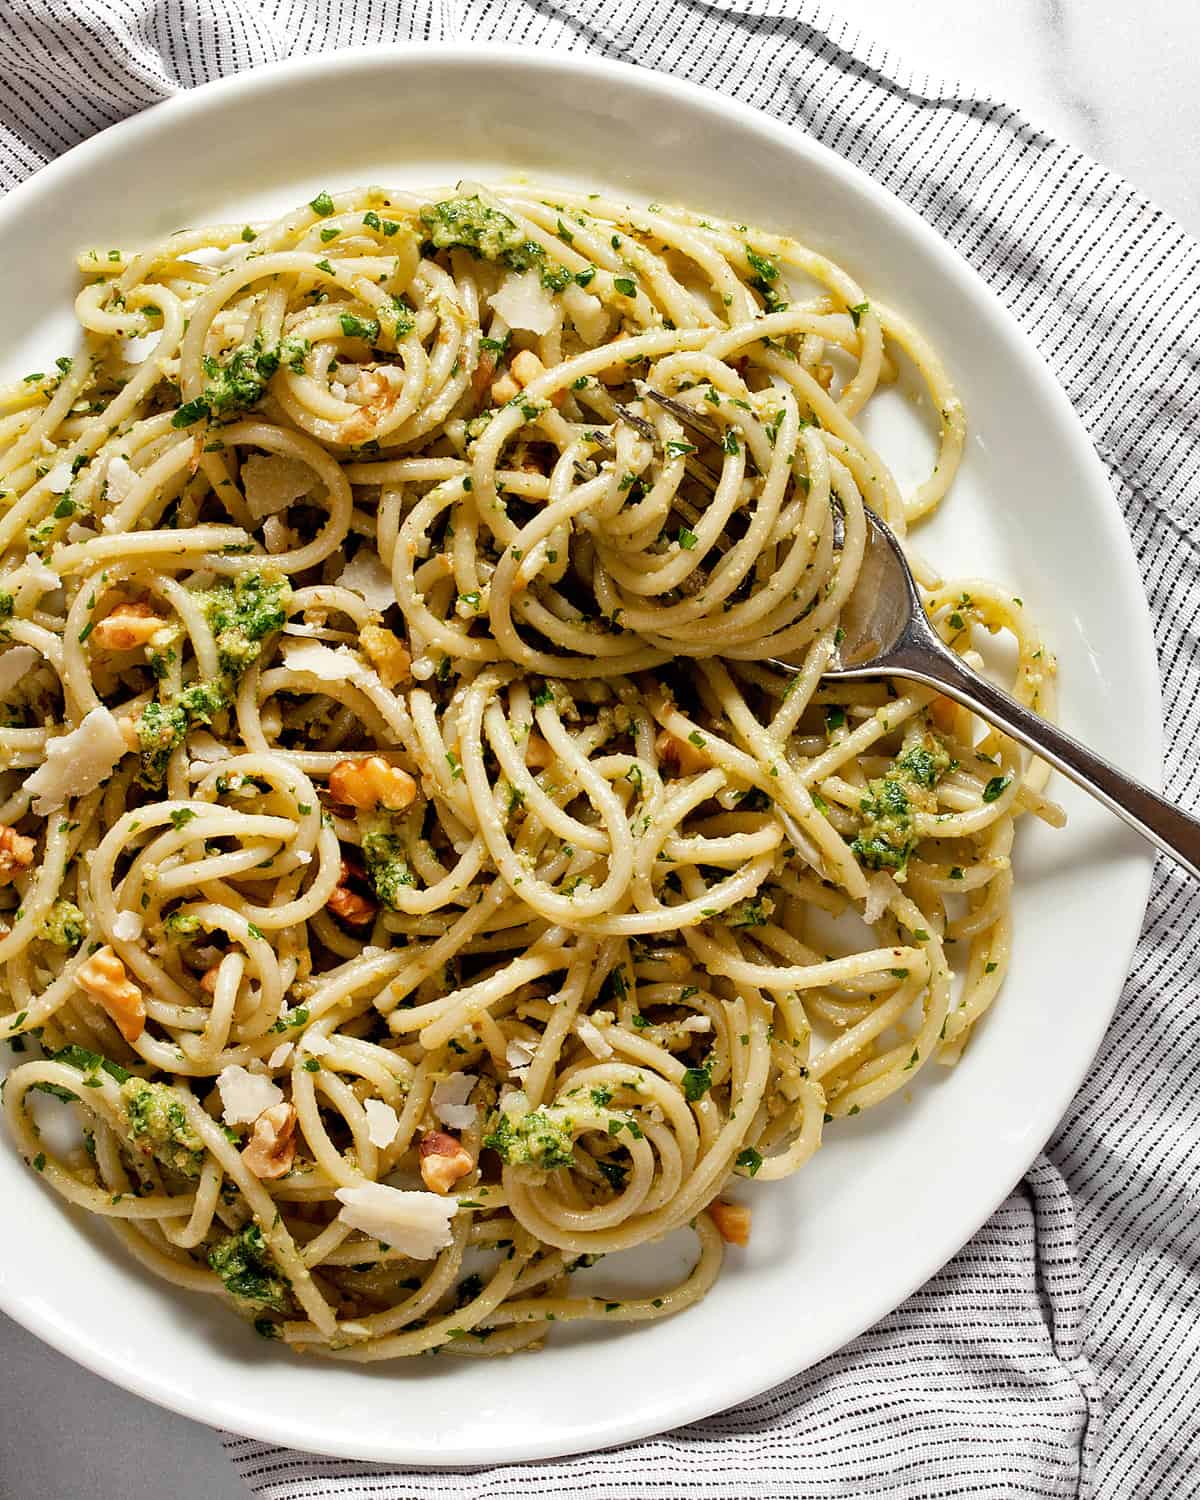 For tisted in spaghetti with parsley pesto on a plate.